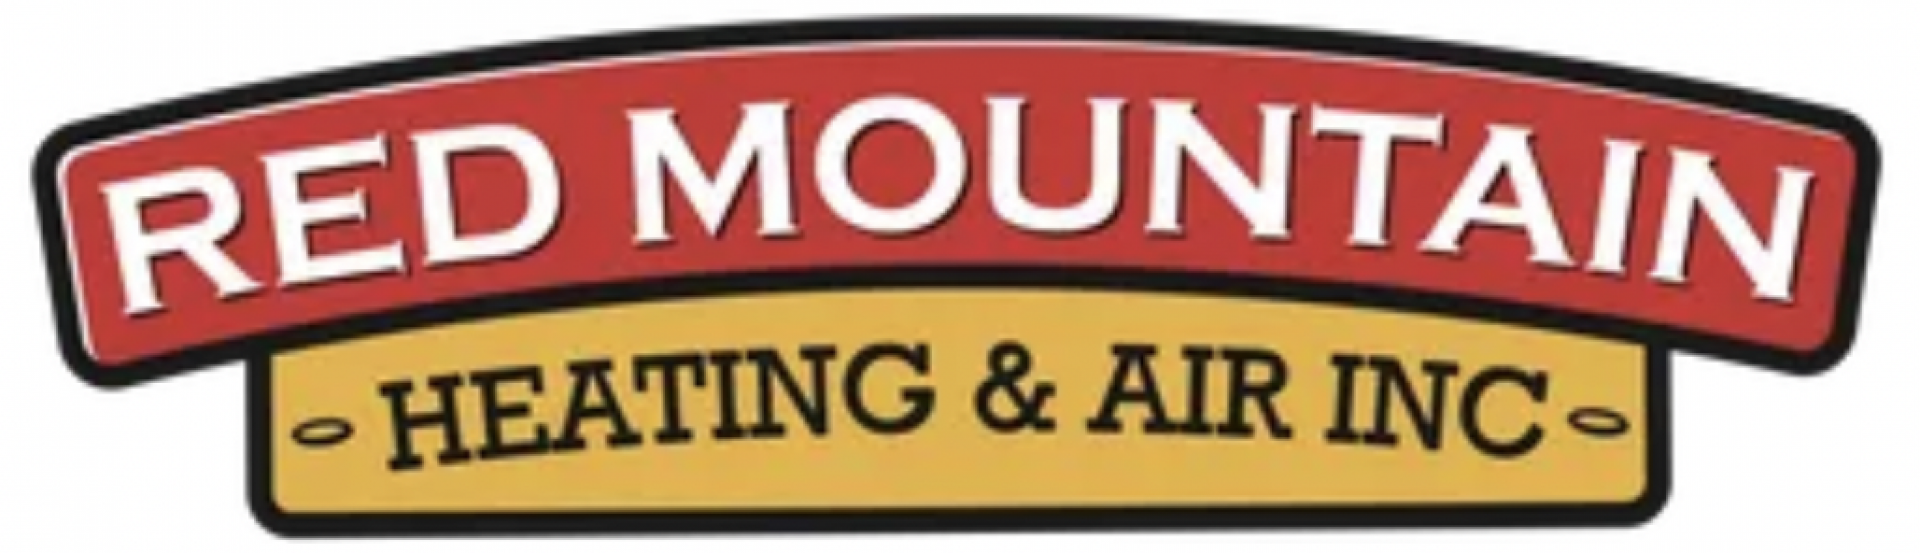 Red Mountain Heating and Air, Inc. company logo